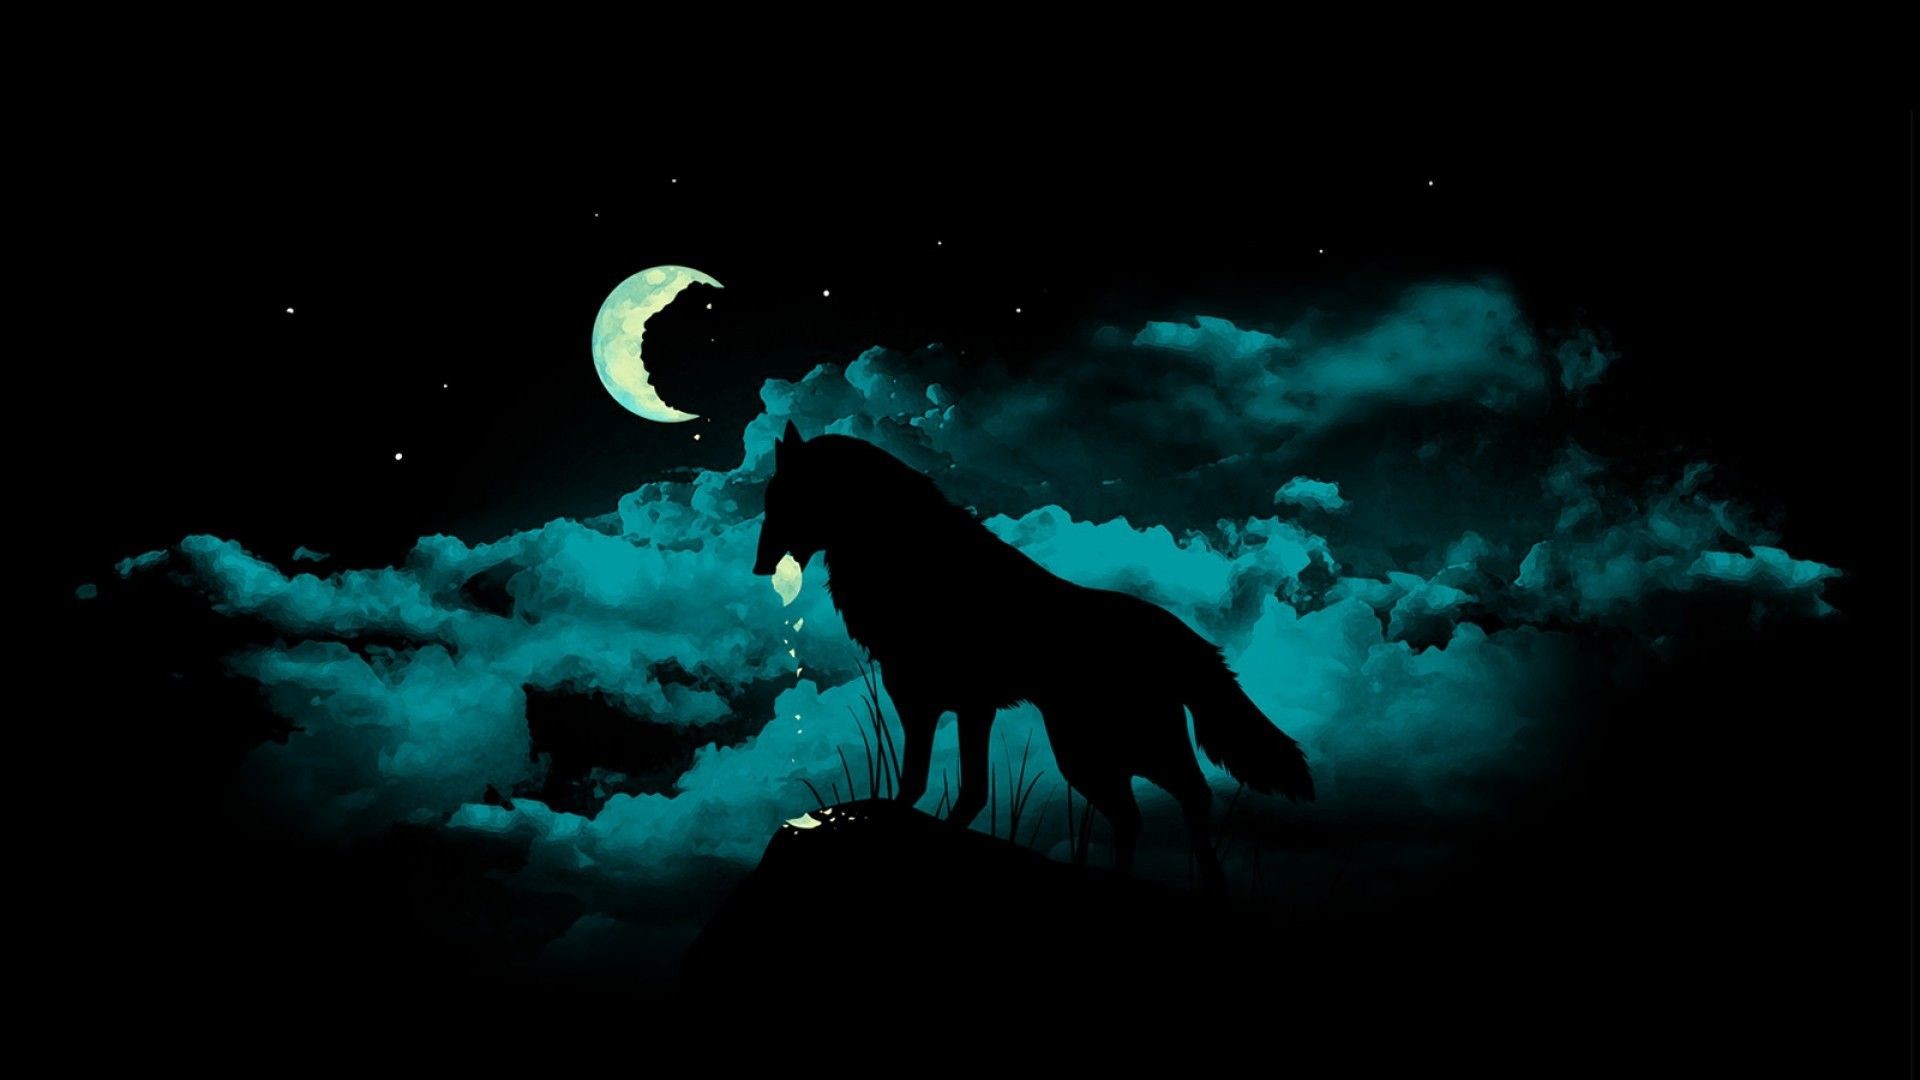 Wallpapers For > Black Wolf Backgrounds